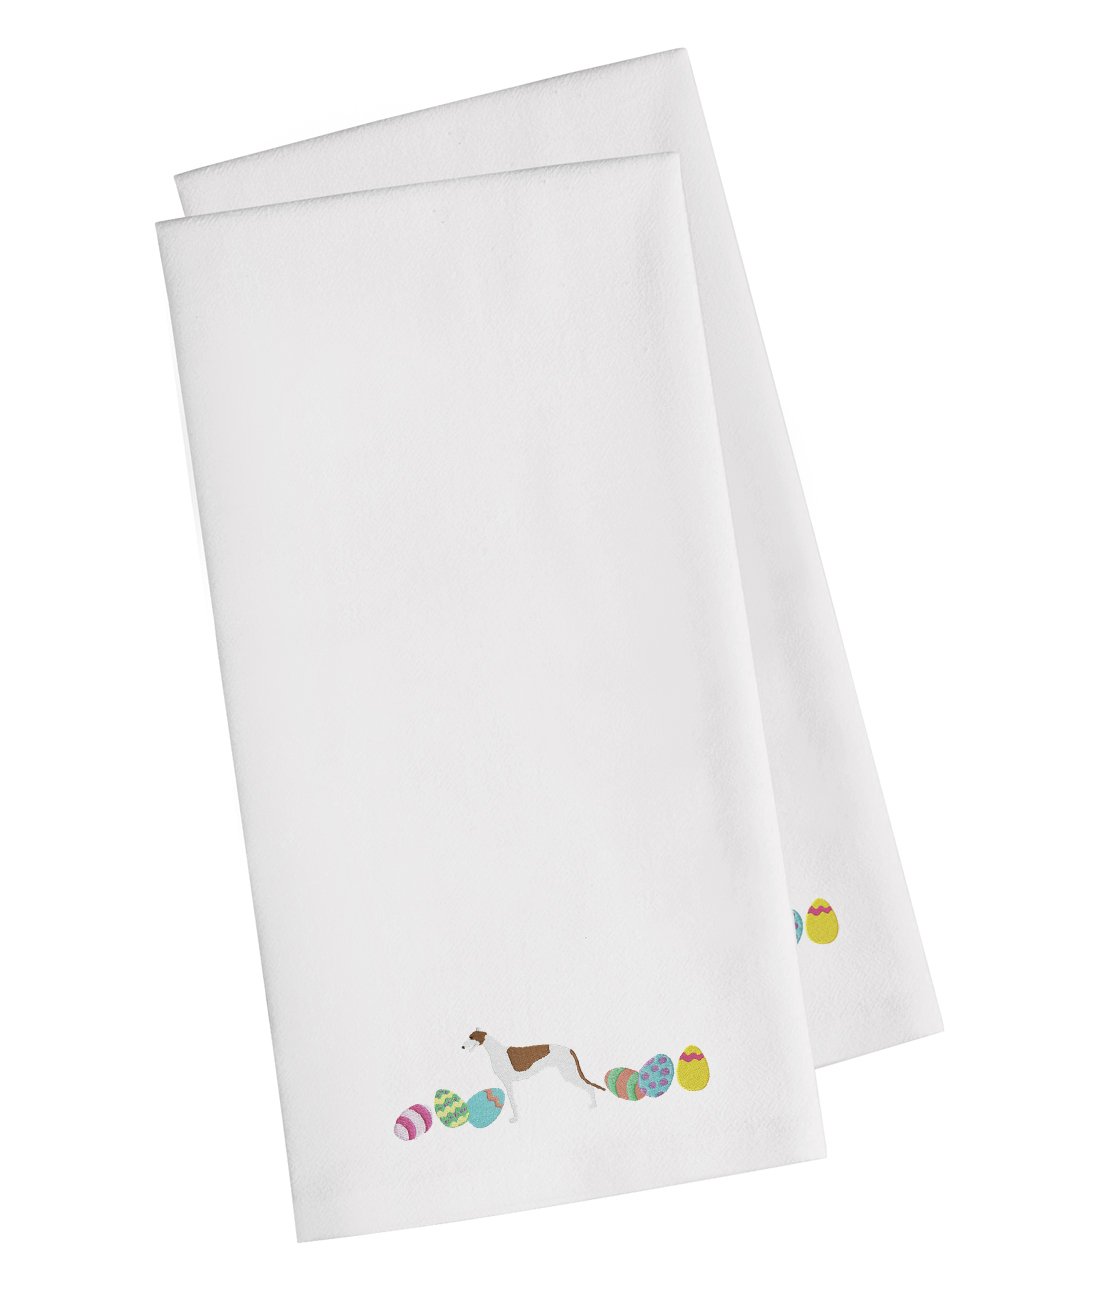 Greyhound Easter White Embroidered Kitchen Towel Set of 2 CK1651WHTWE by Caroline's Treasures